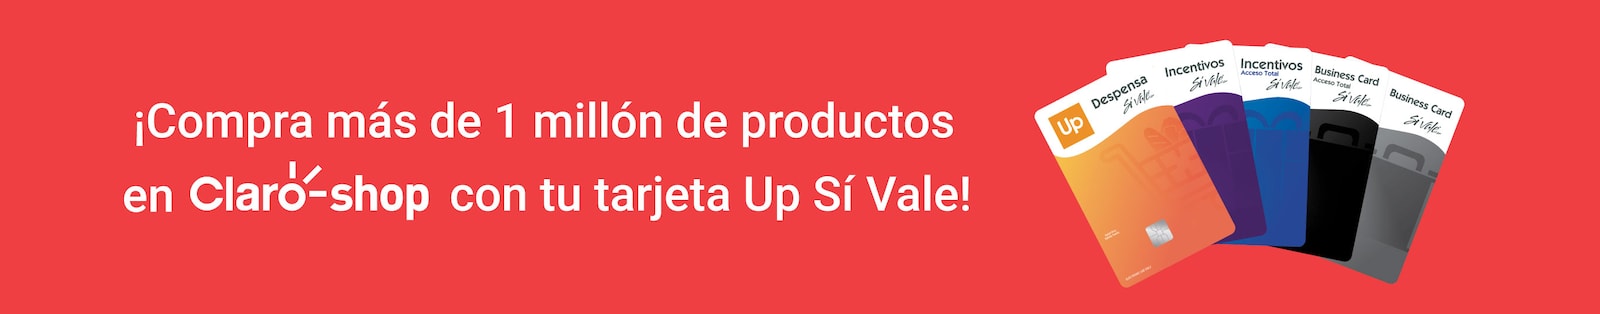 Up Si Vale